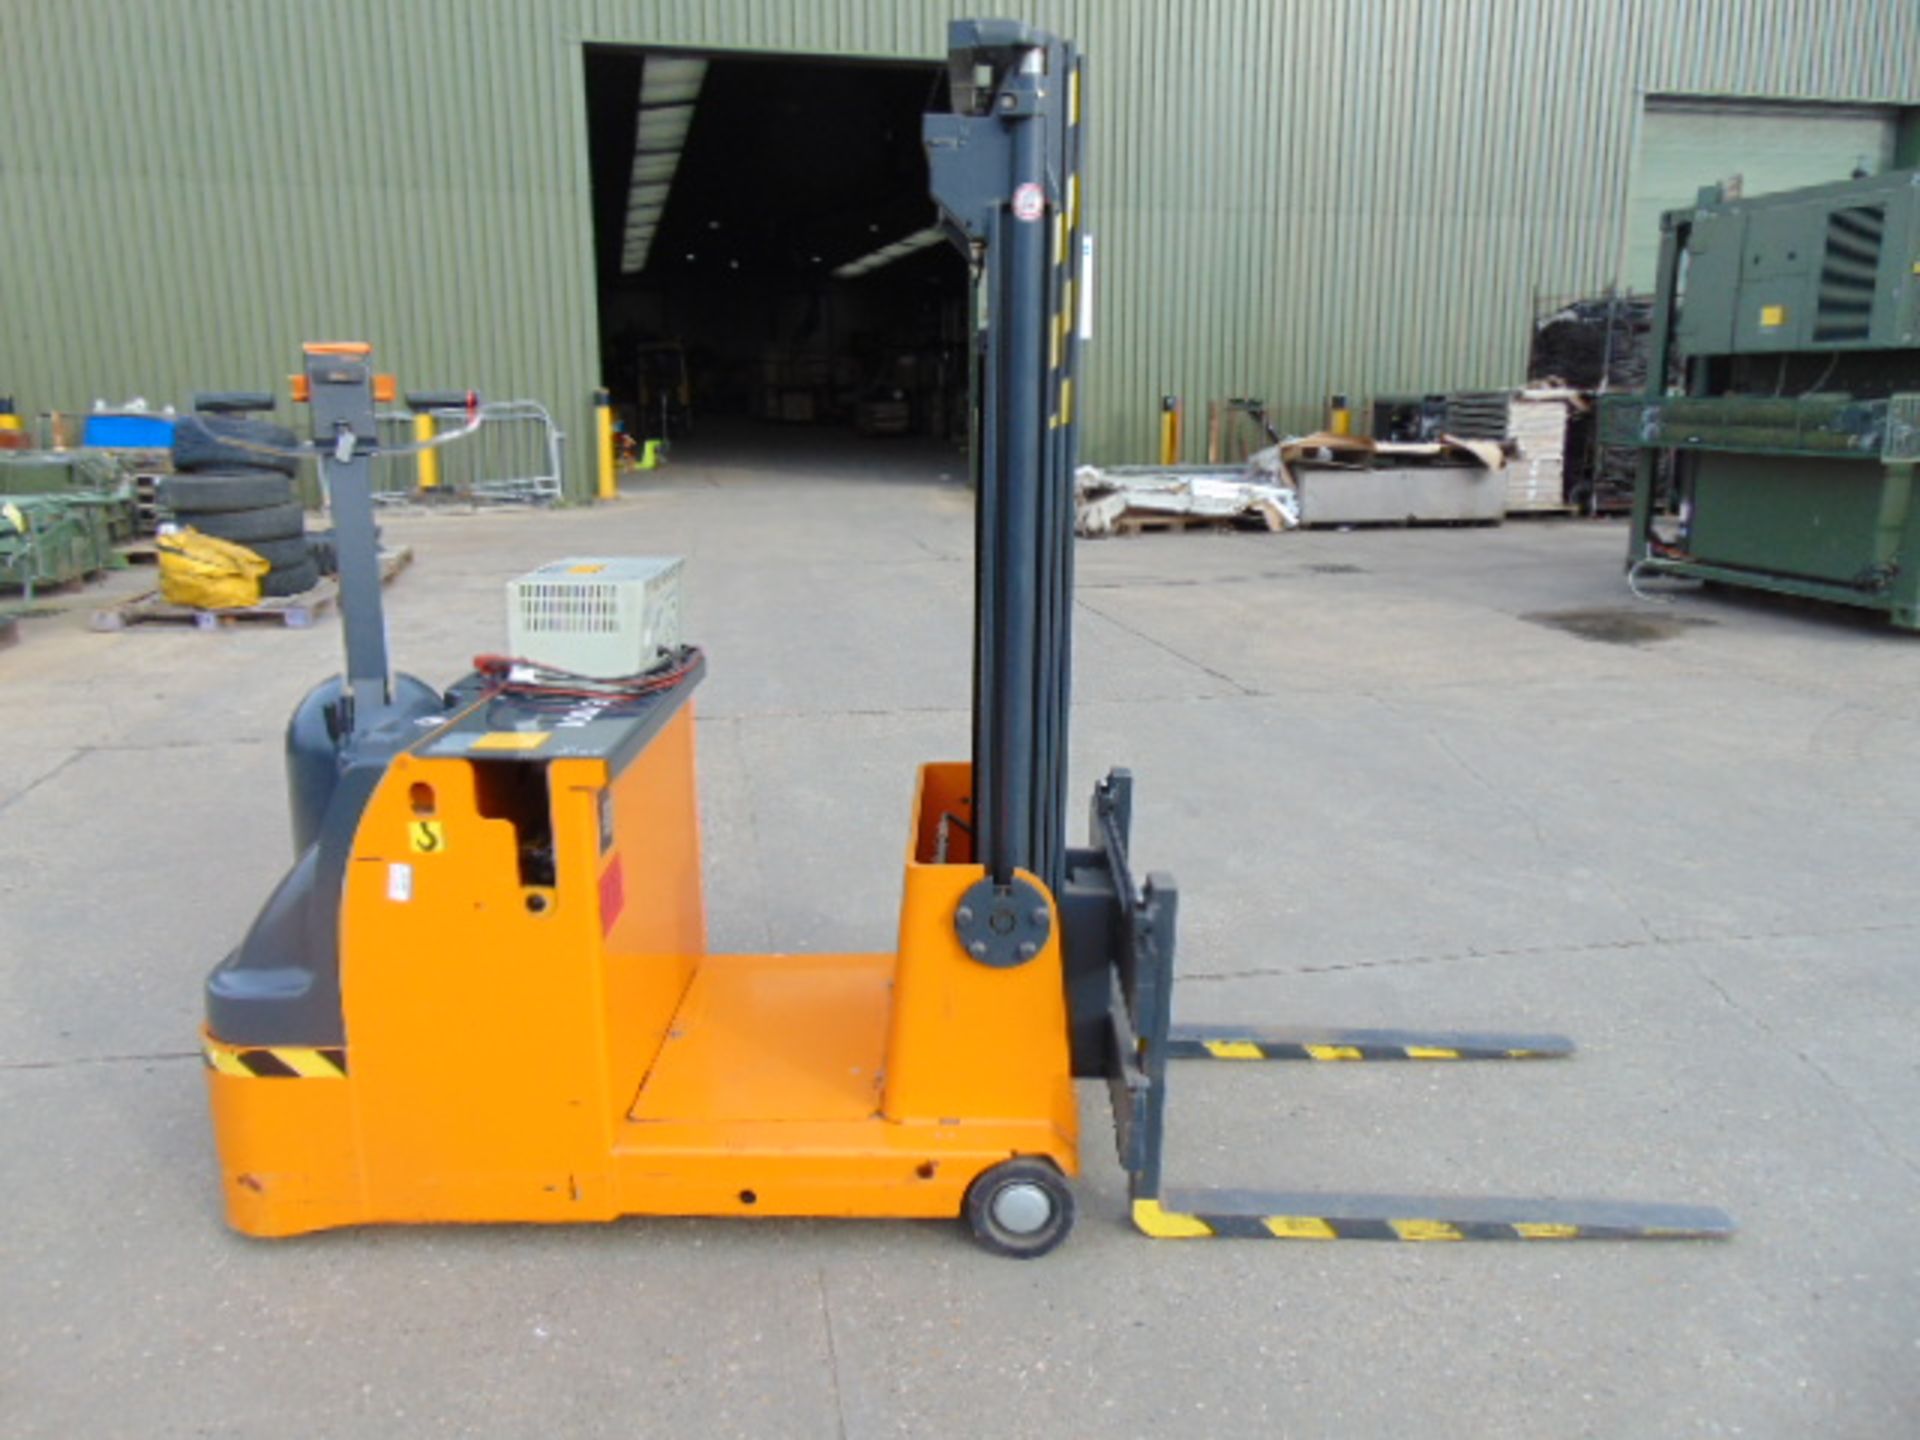 Still EGG10 Electric Pedestrian Pallet Stacker c/w Charger - Image 8 of 19